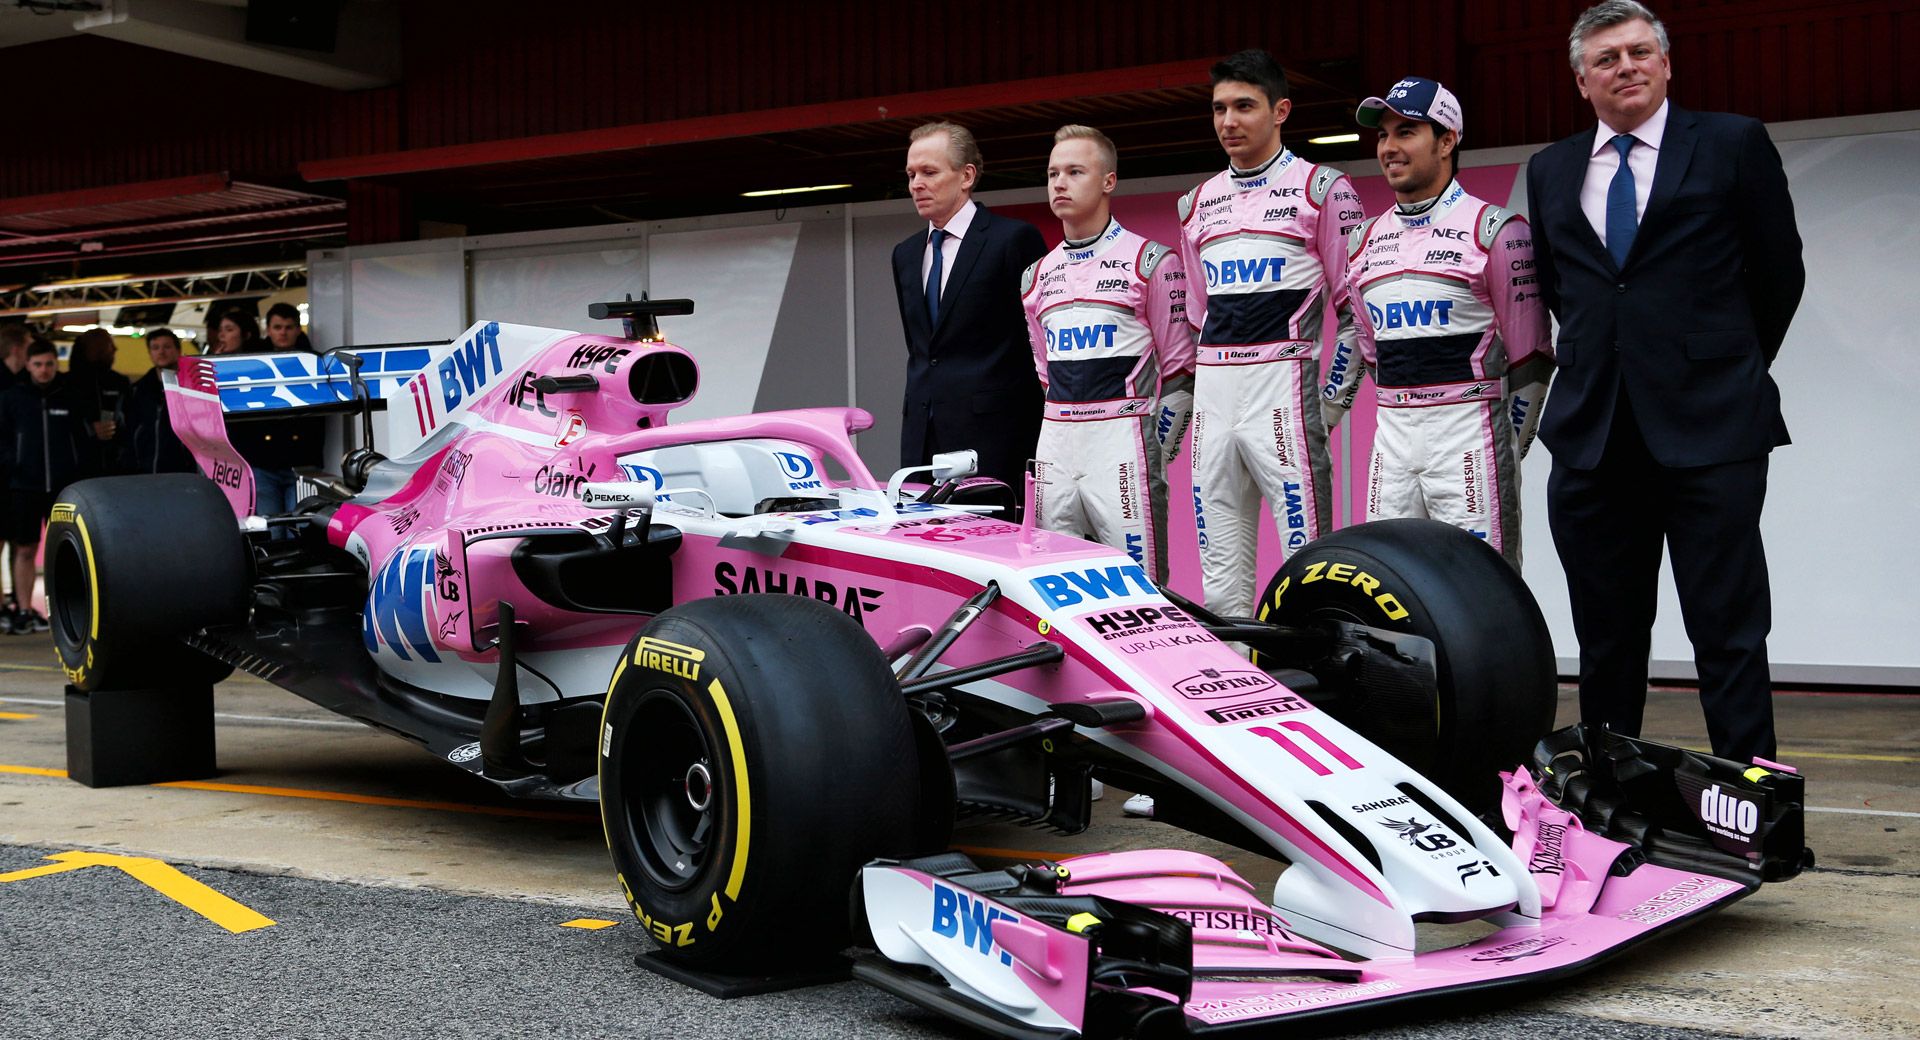 Force India F1 team history